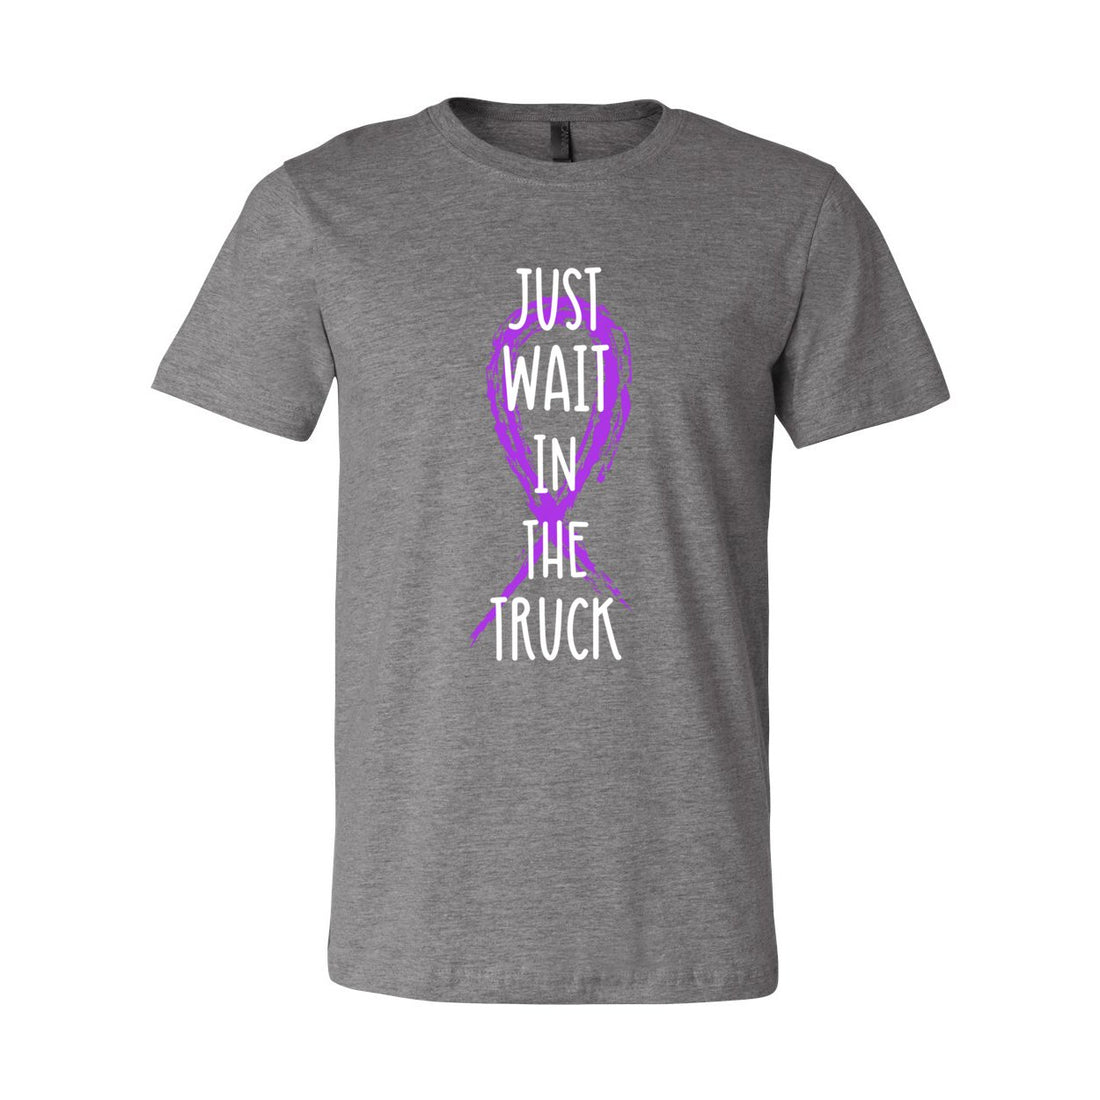 Stay In The Truck Short Sleeve Jersey Tee - T-Shirts - Positively Sassy - Stay In The Truck Short Sleeve Jersey Tee